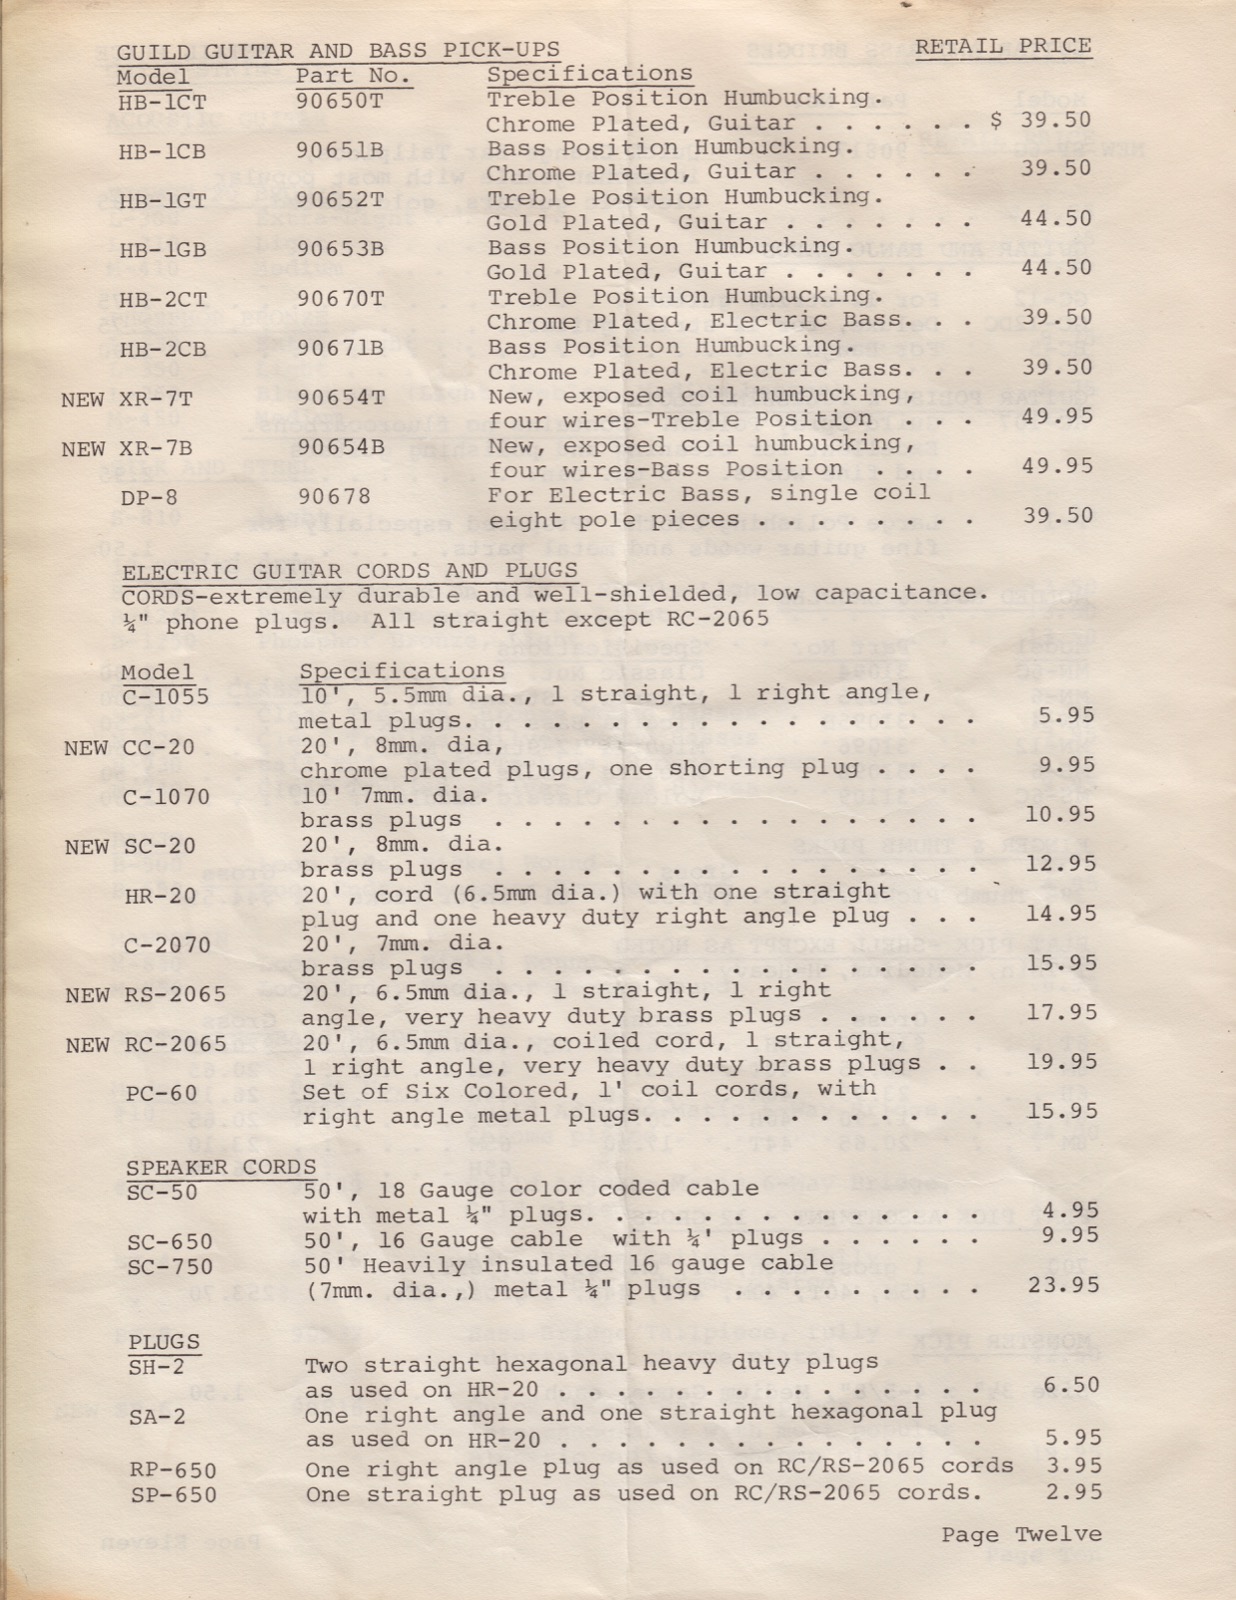 Guild Guitar Price List - 1983 March (A) | GAD's Ramblings